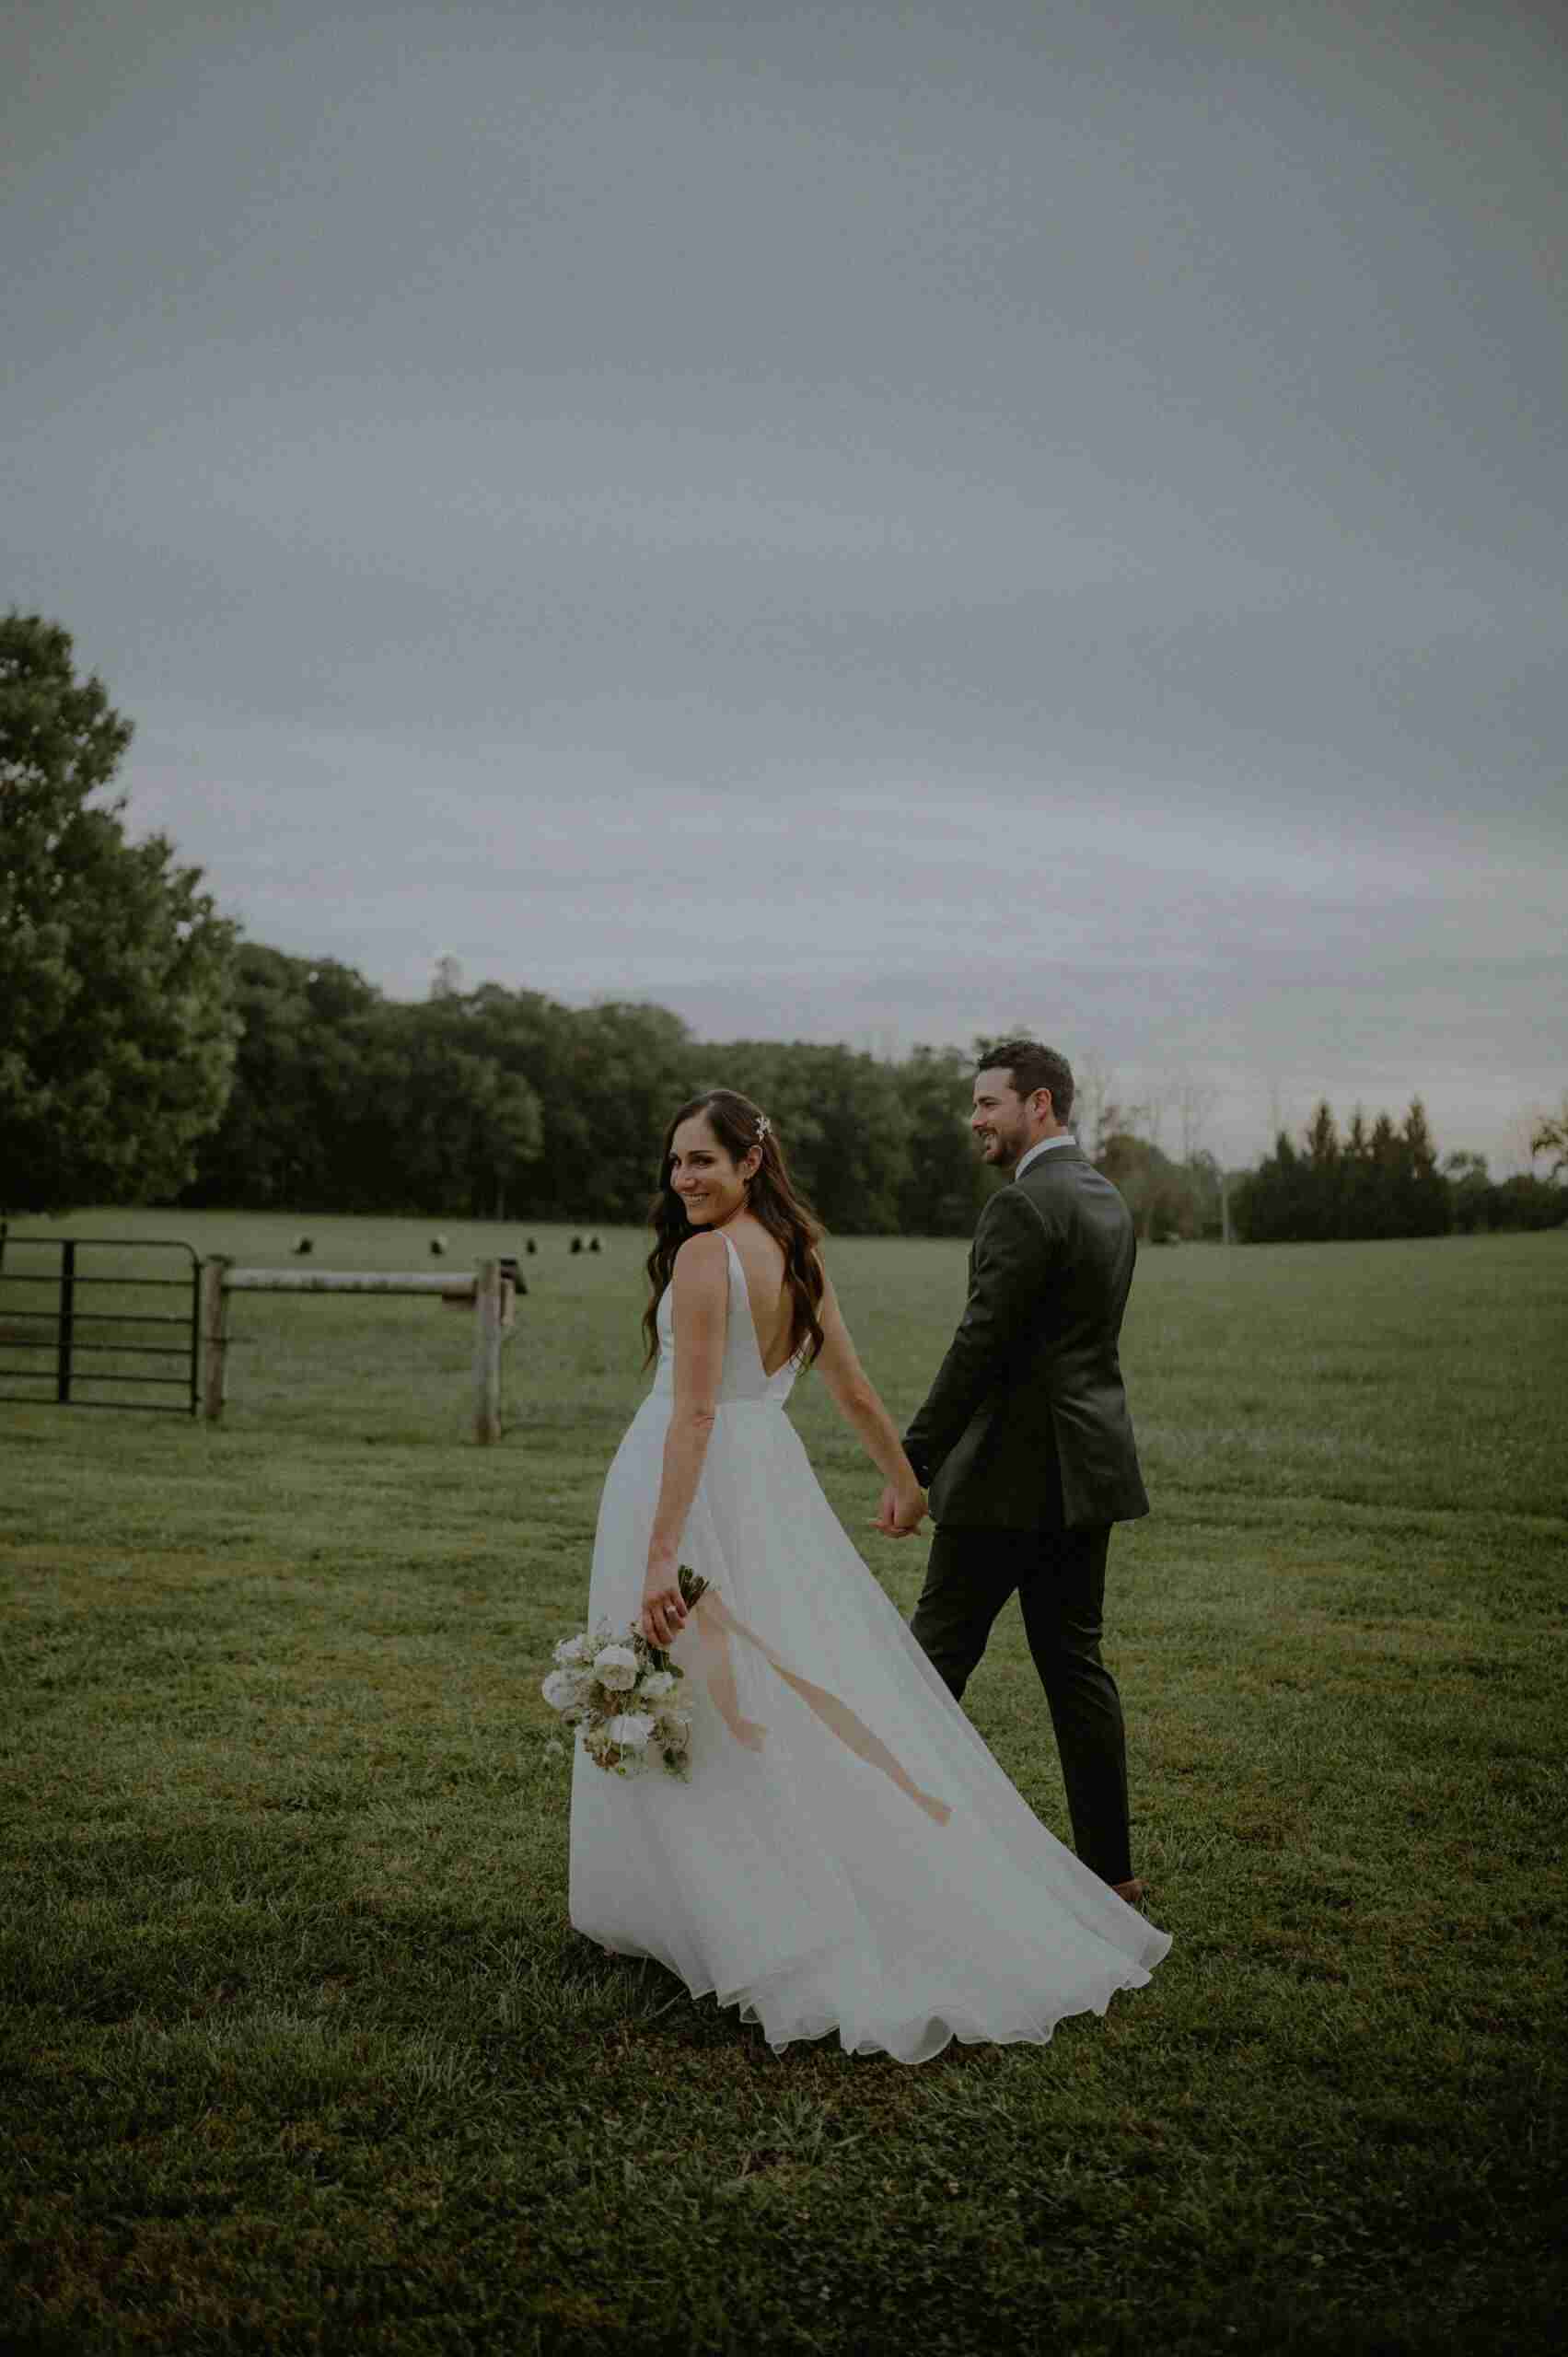 Alexa and Ryan's Whimsical Floral Filled Nuptials in New Jersey